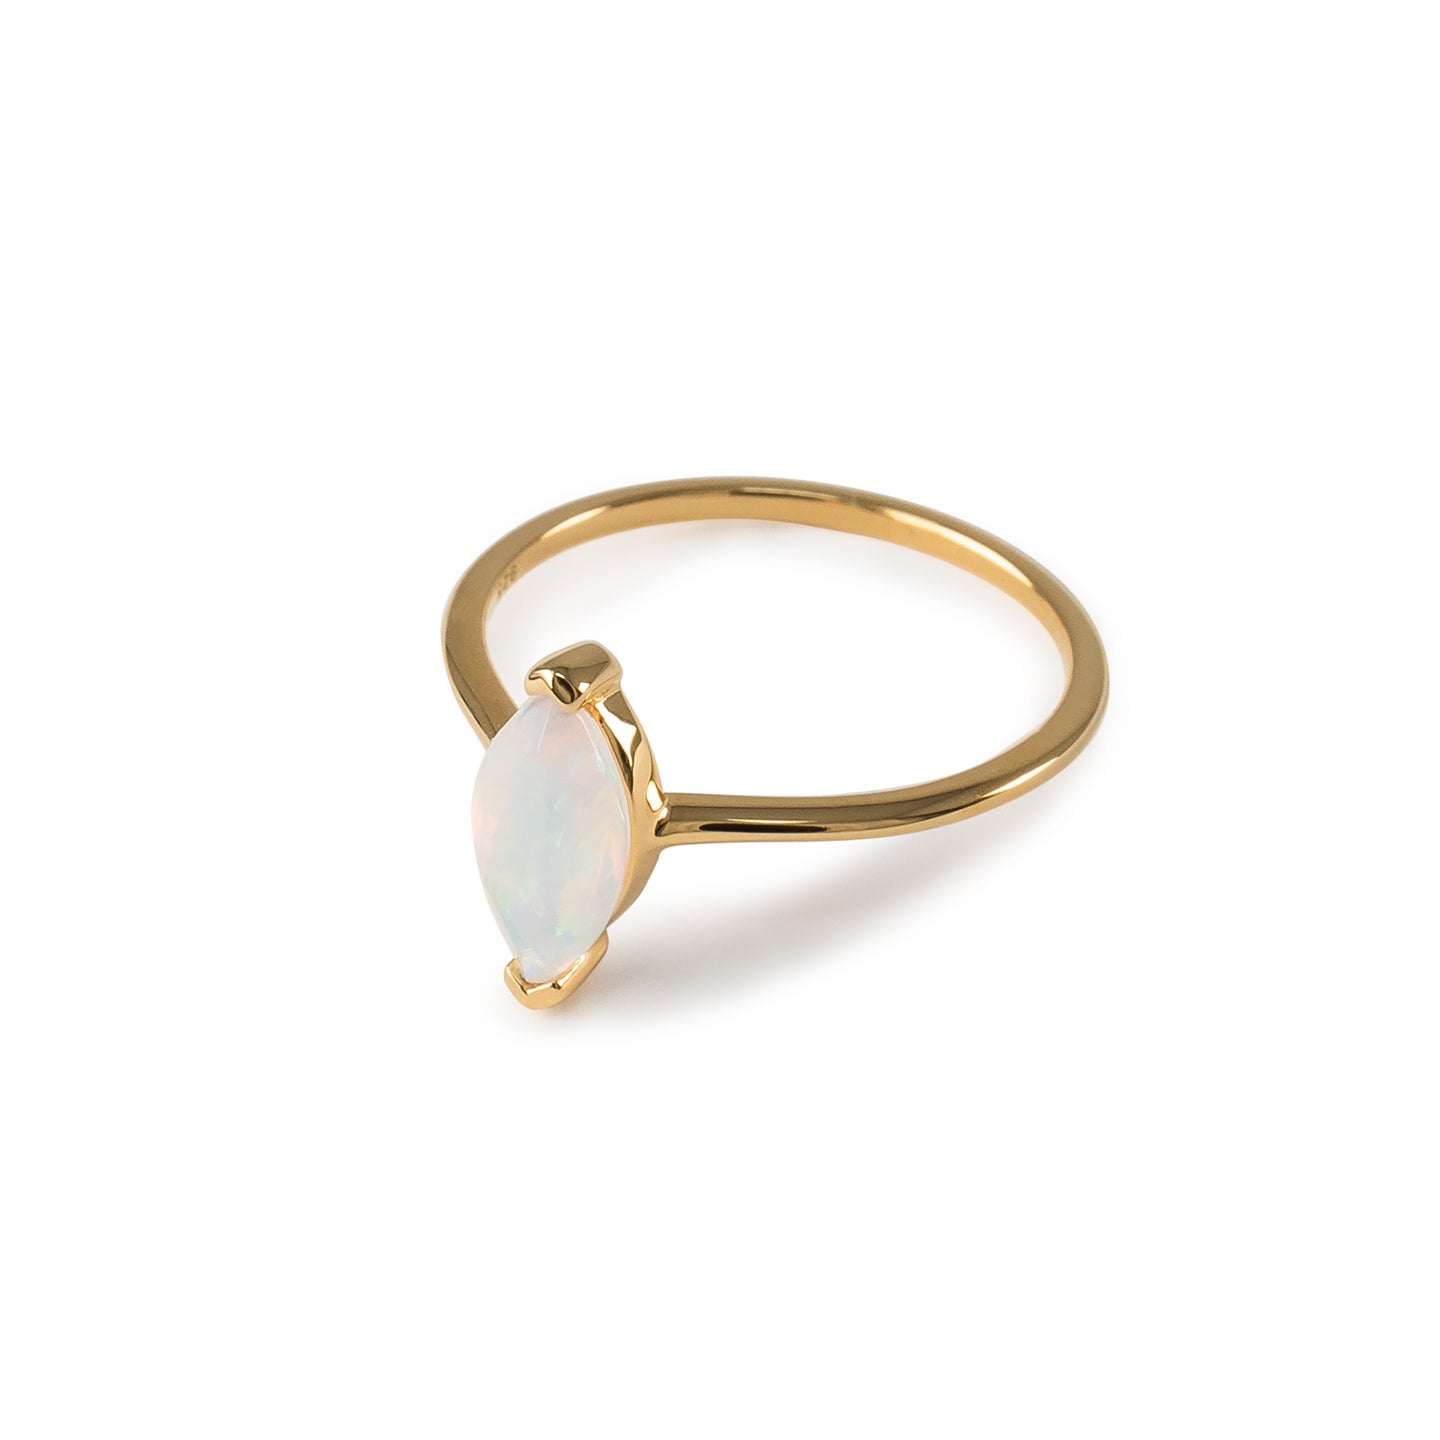 White Opal Marquise Ring in 14K Gold Vermeil